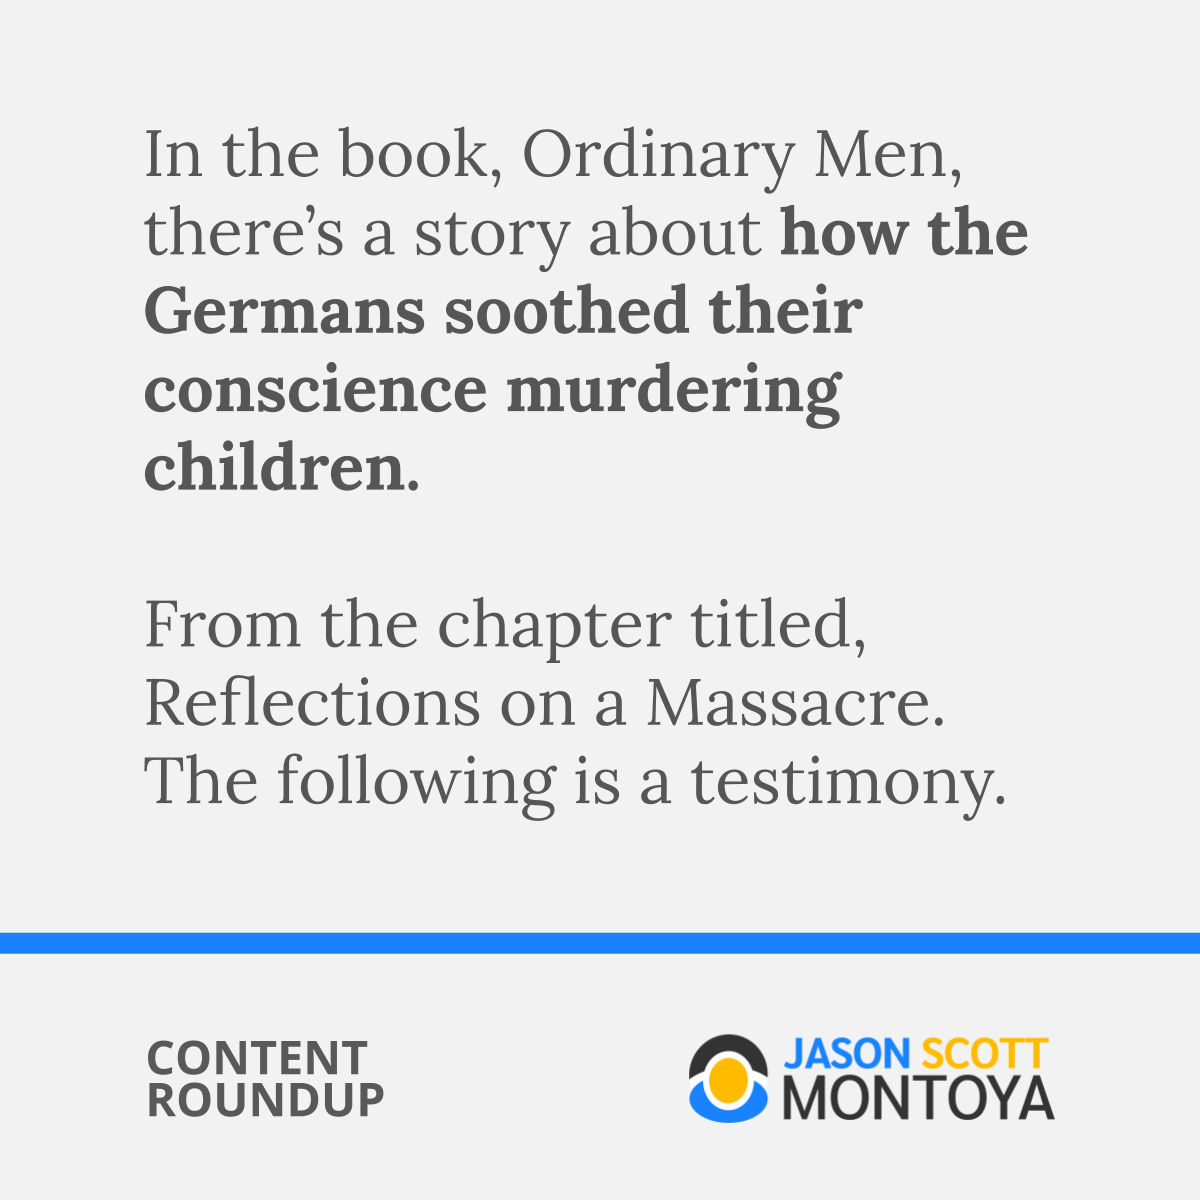 In the book, Ordinary Men, there’s a story about how the Germans soothed their conscience murdering children.  From the chapter titled, Reflections on a Massacre. The following is a testimony.